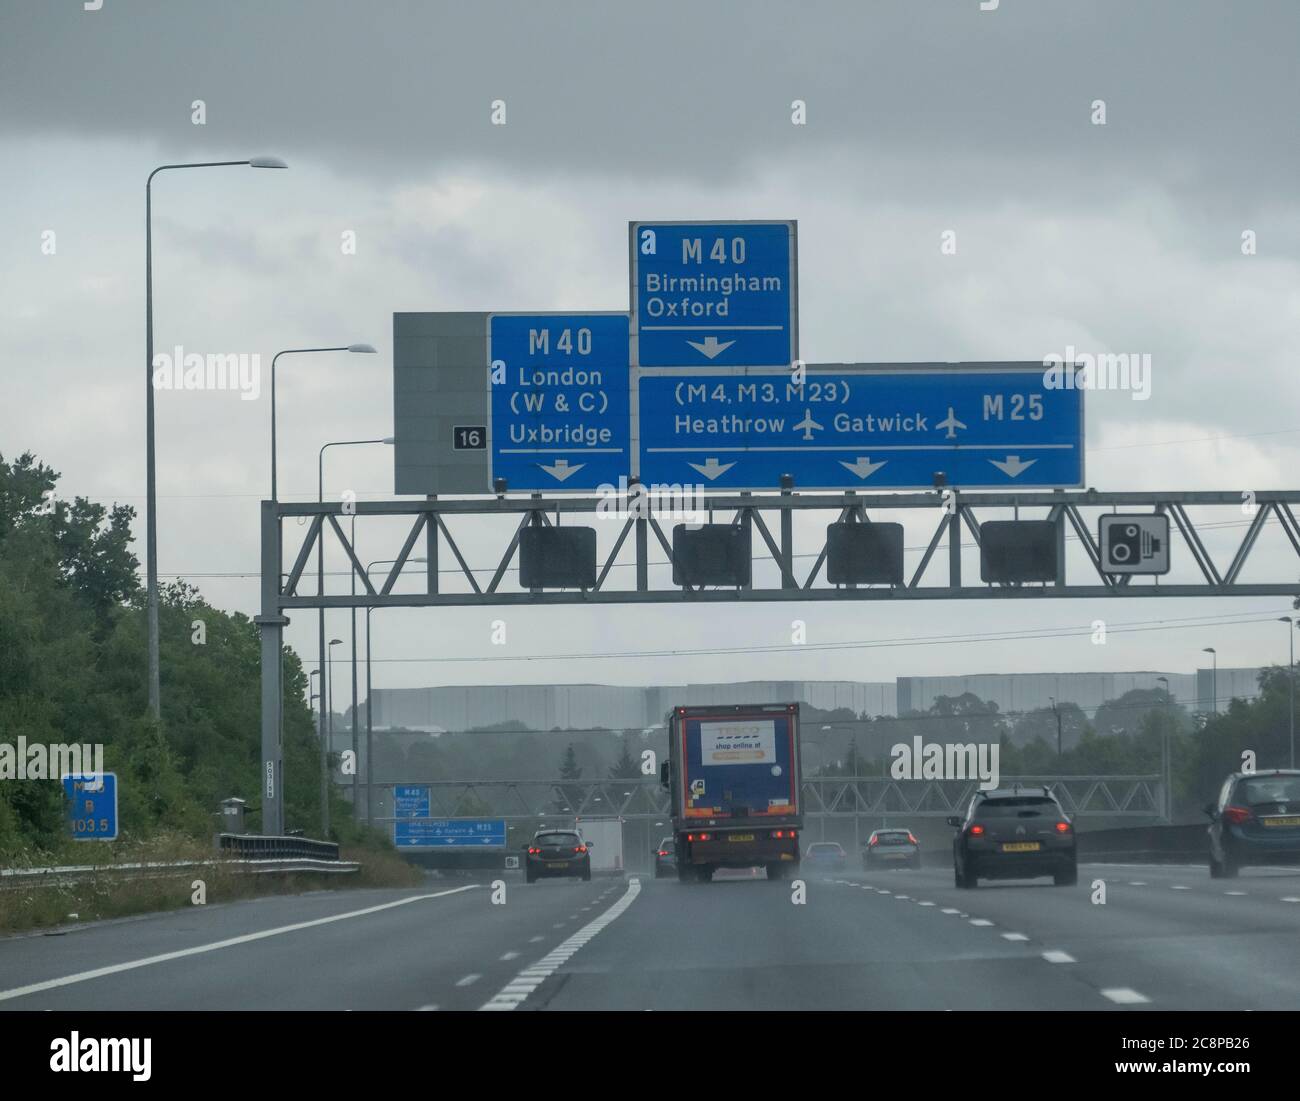 London, UK. 26 July 2020. Mixed spells of heavy rain and sunny spells for drivers on the M25 London Orbital motorway on a busy Sunday afternoon. Credit: Malcolm Park/Alamy Live News. Stock Photo